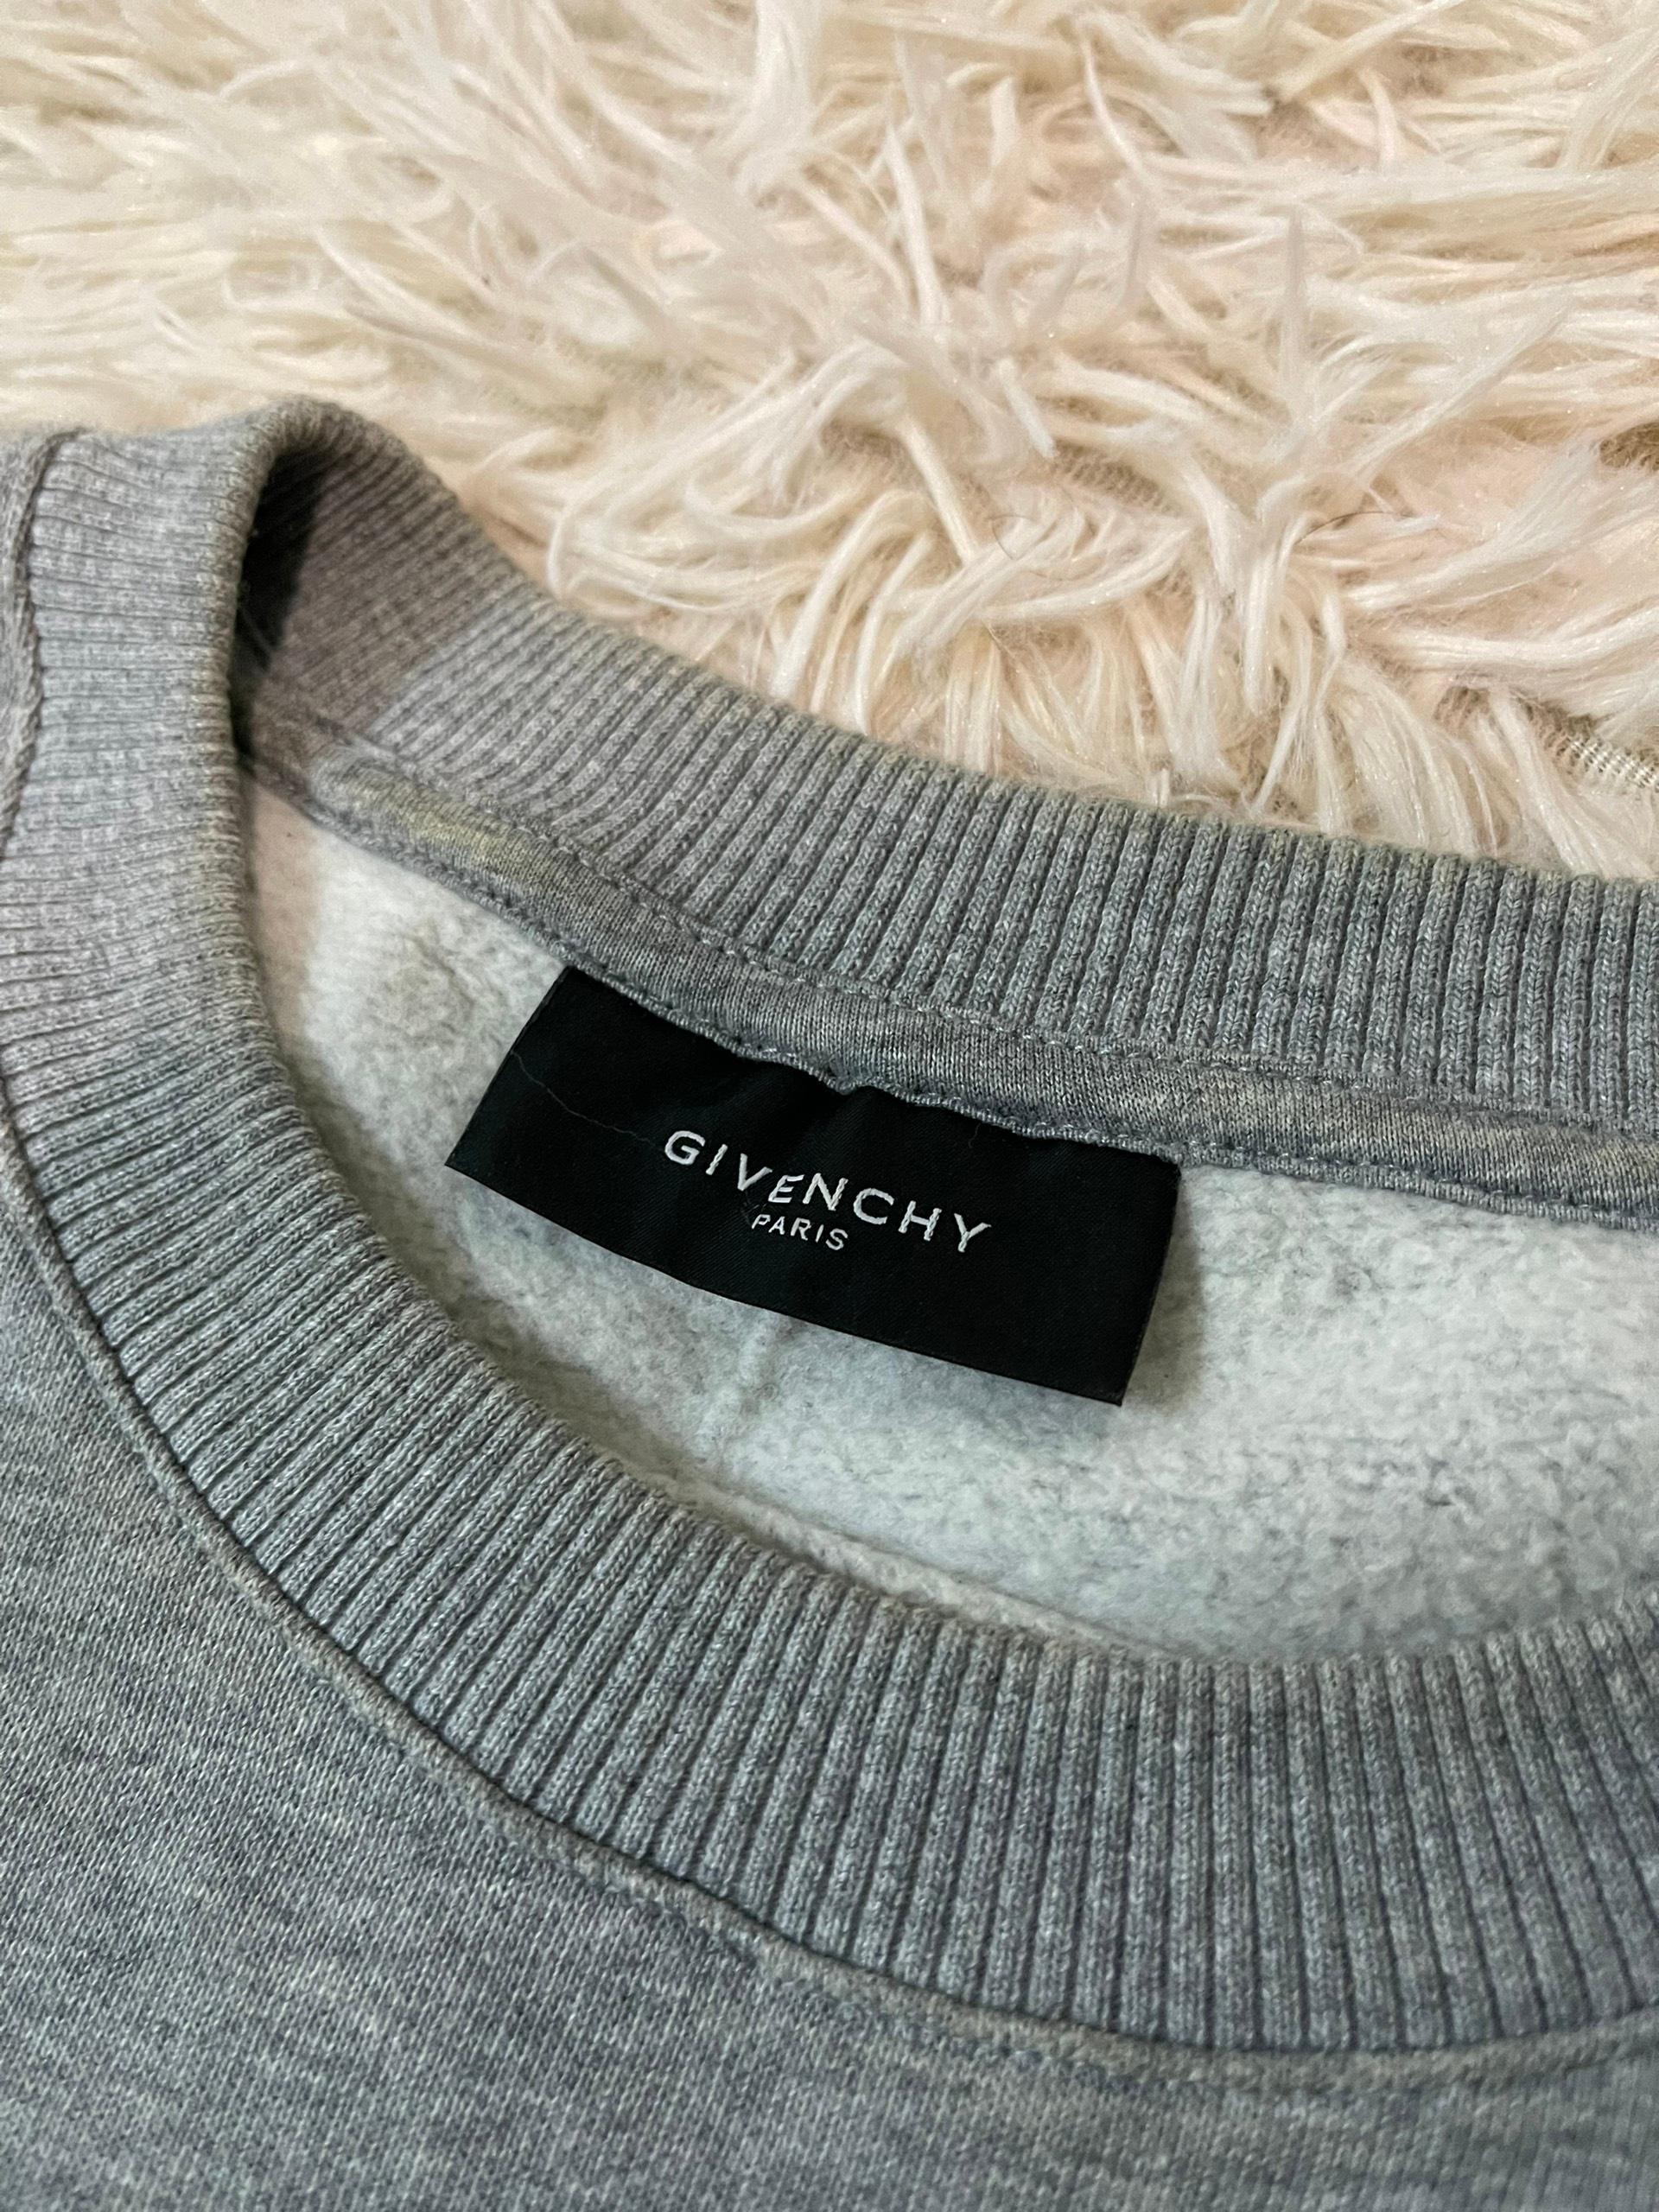 Givenchy F/W2013 Robert Mapplethorpe Naked Woman Sweatshirt In Good Condition For Sale In Seattle, WA